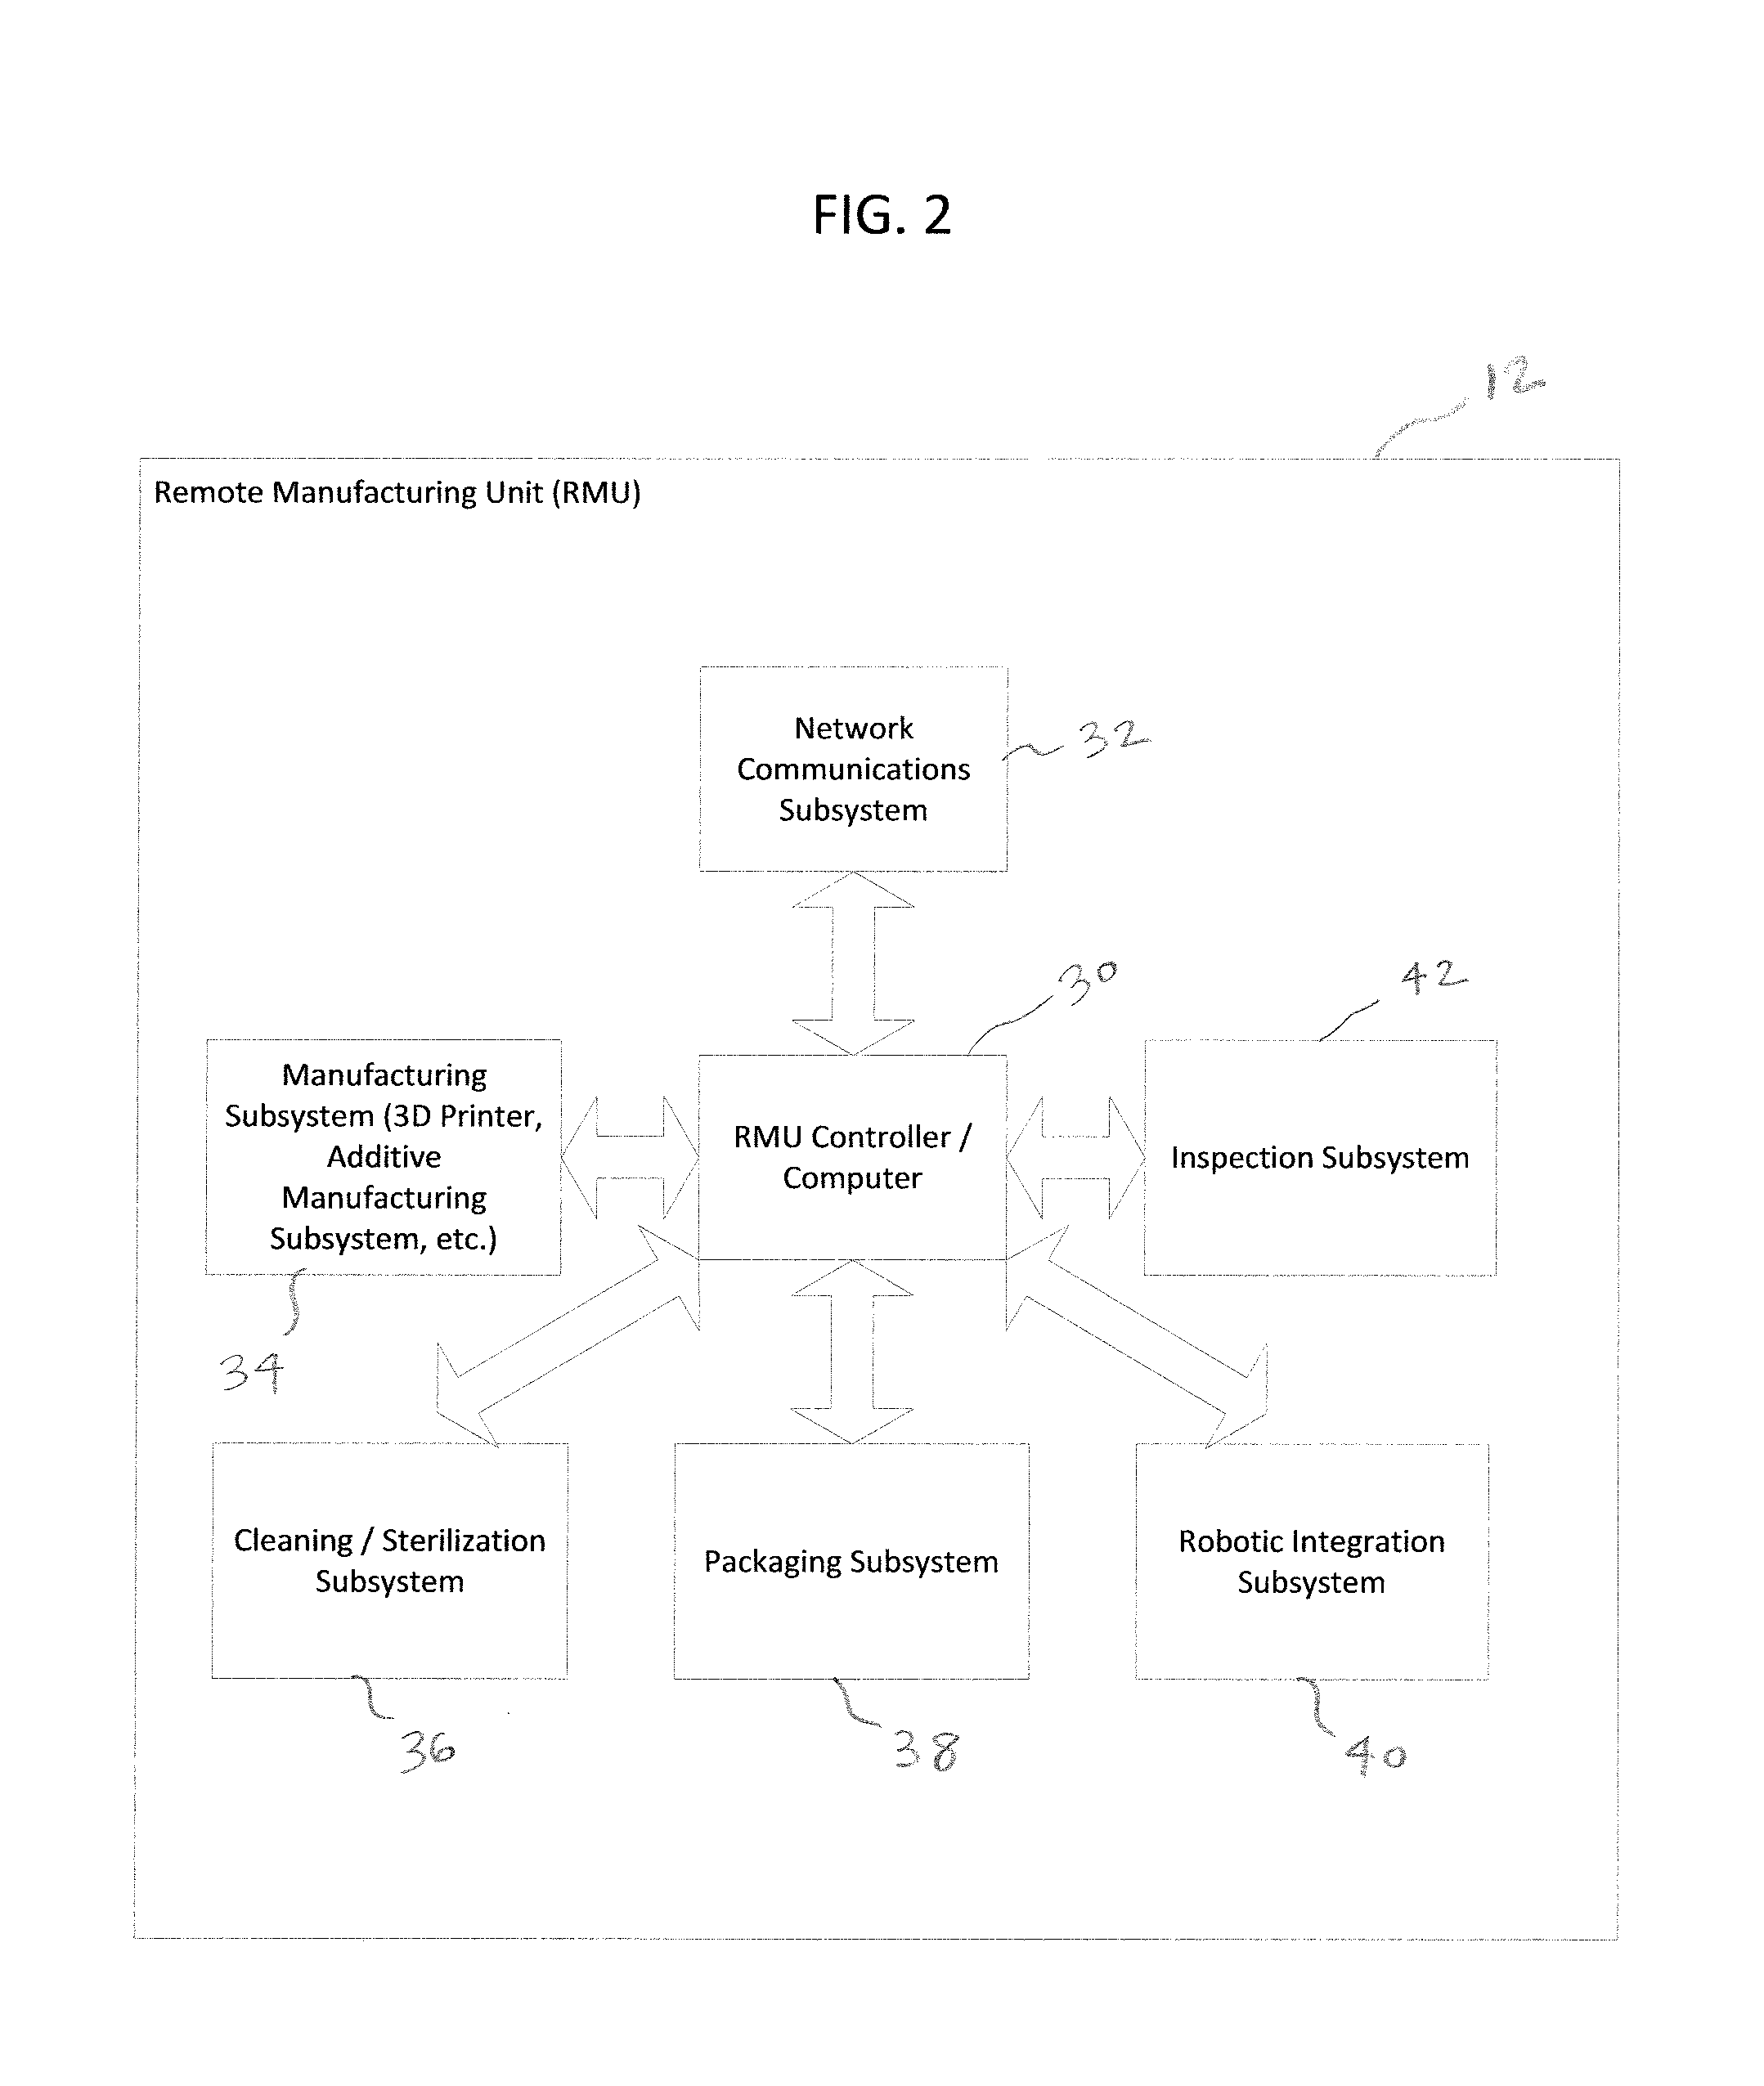 Systems and Methods for Remote Manufacturing of Medical Devices